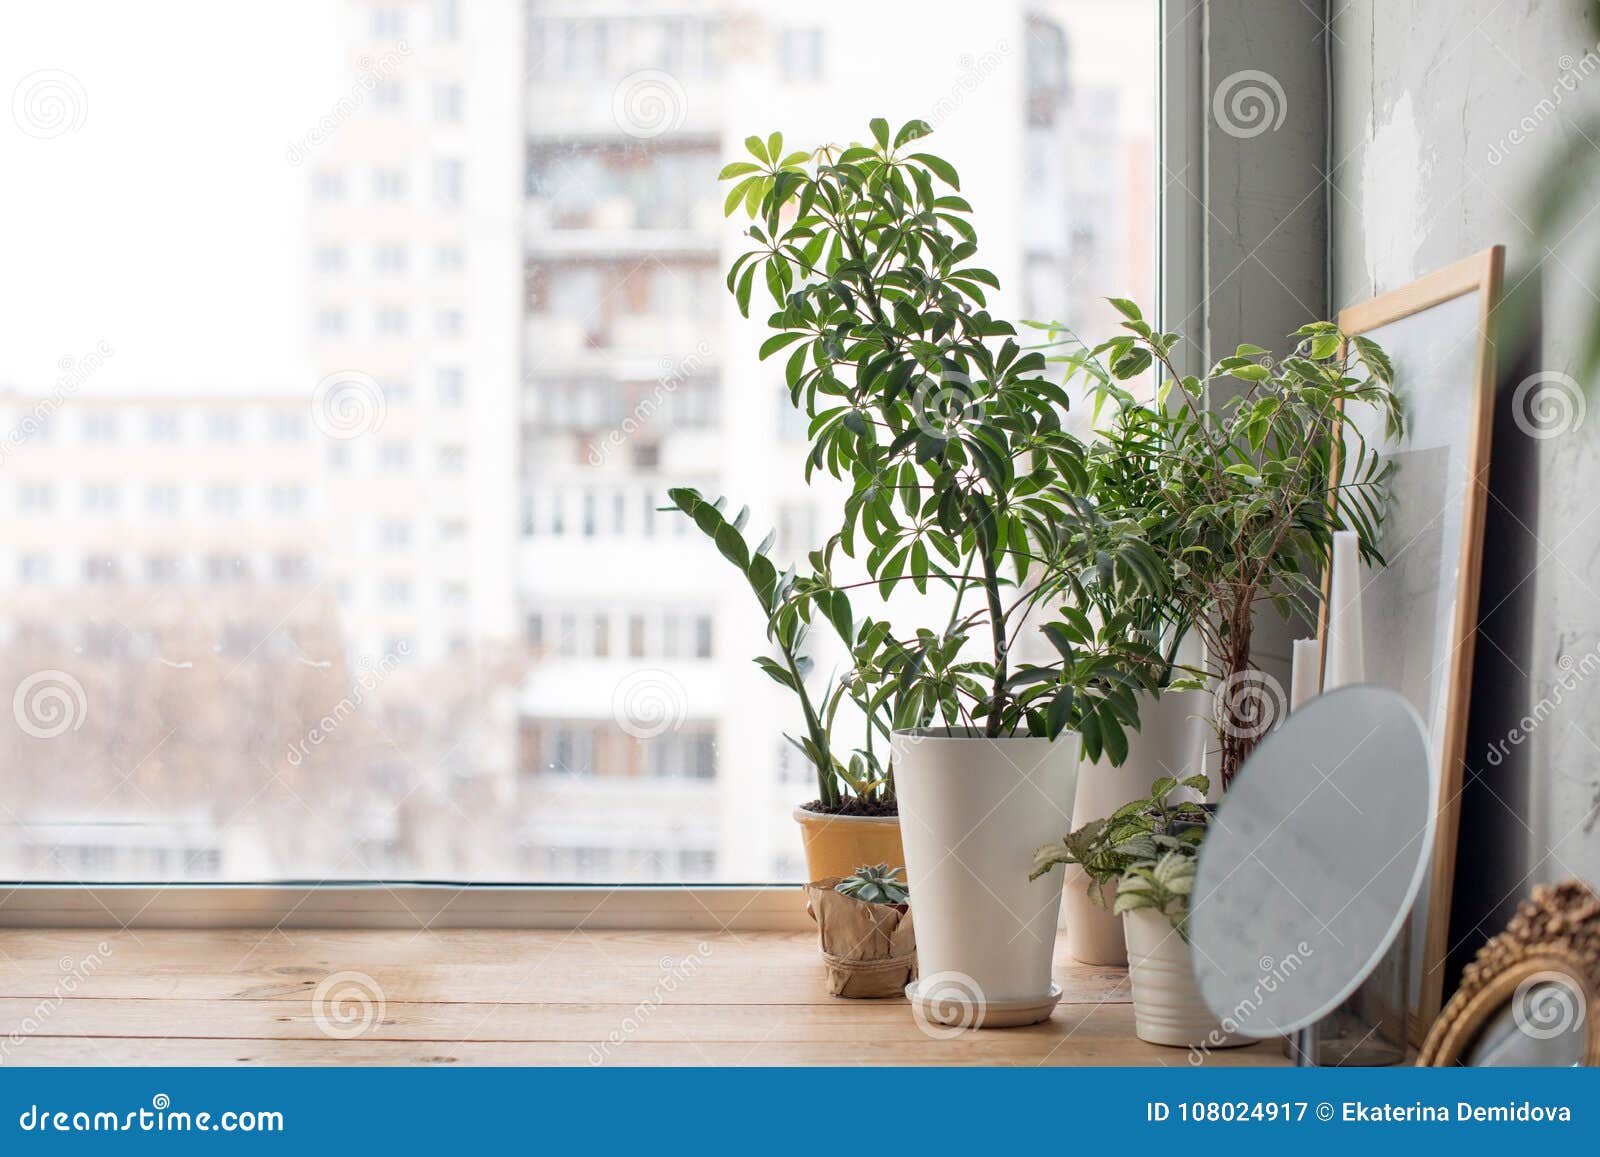 potted plants on window sill